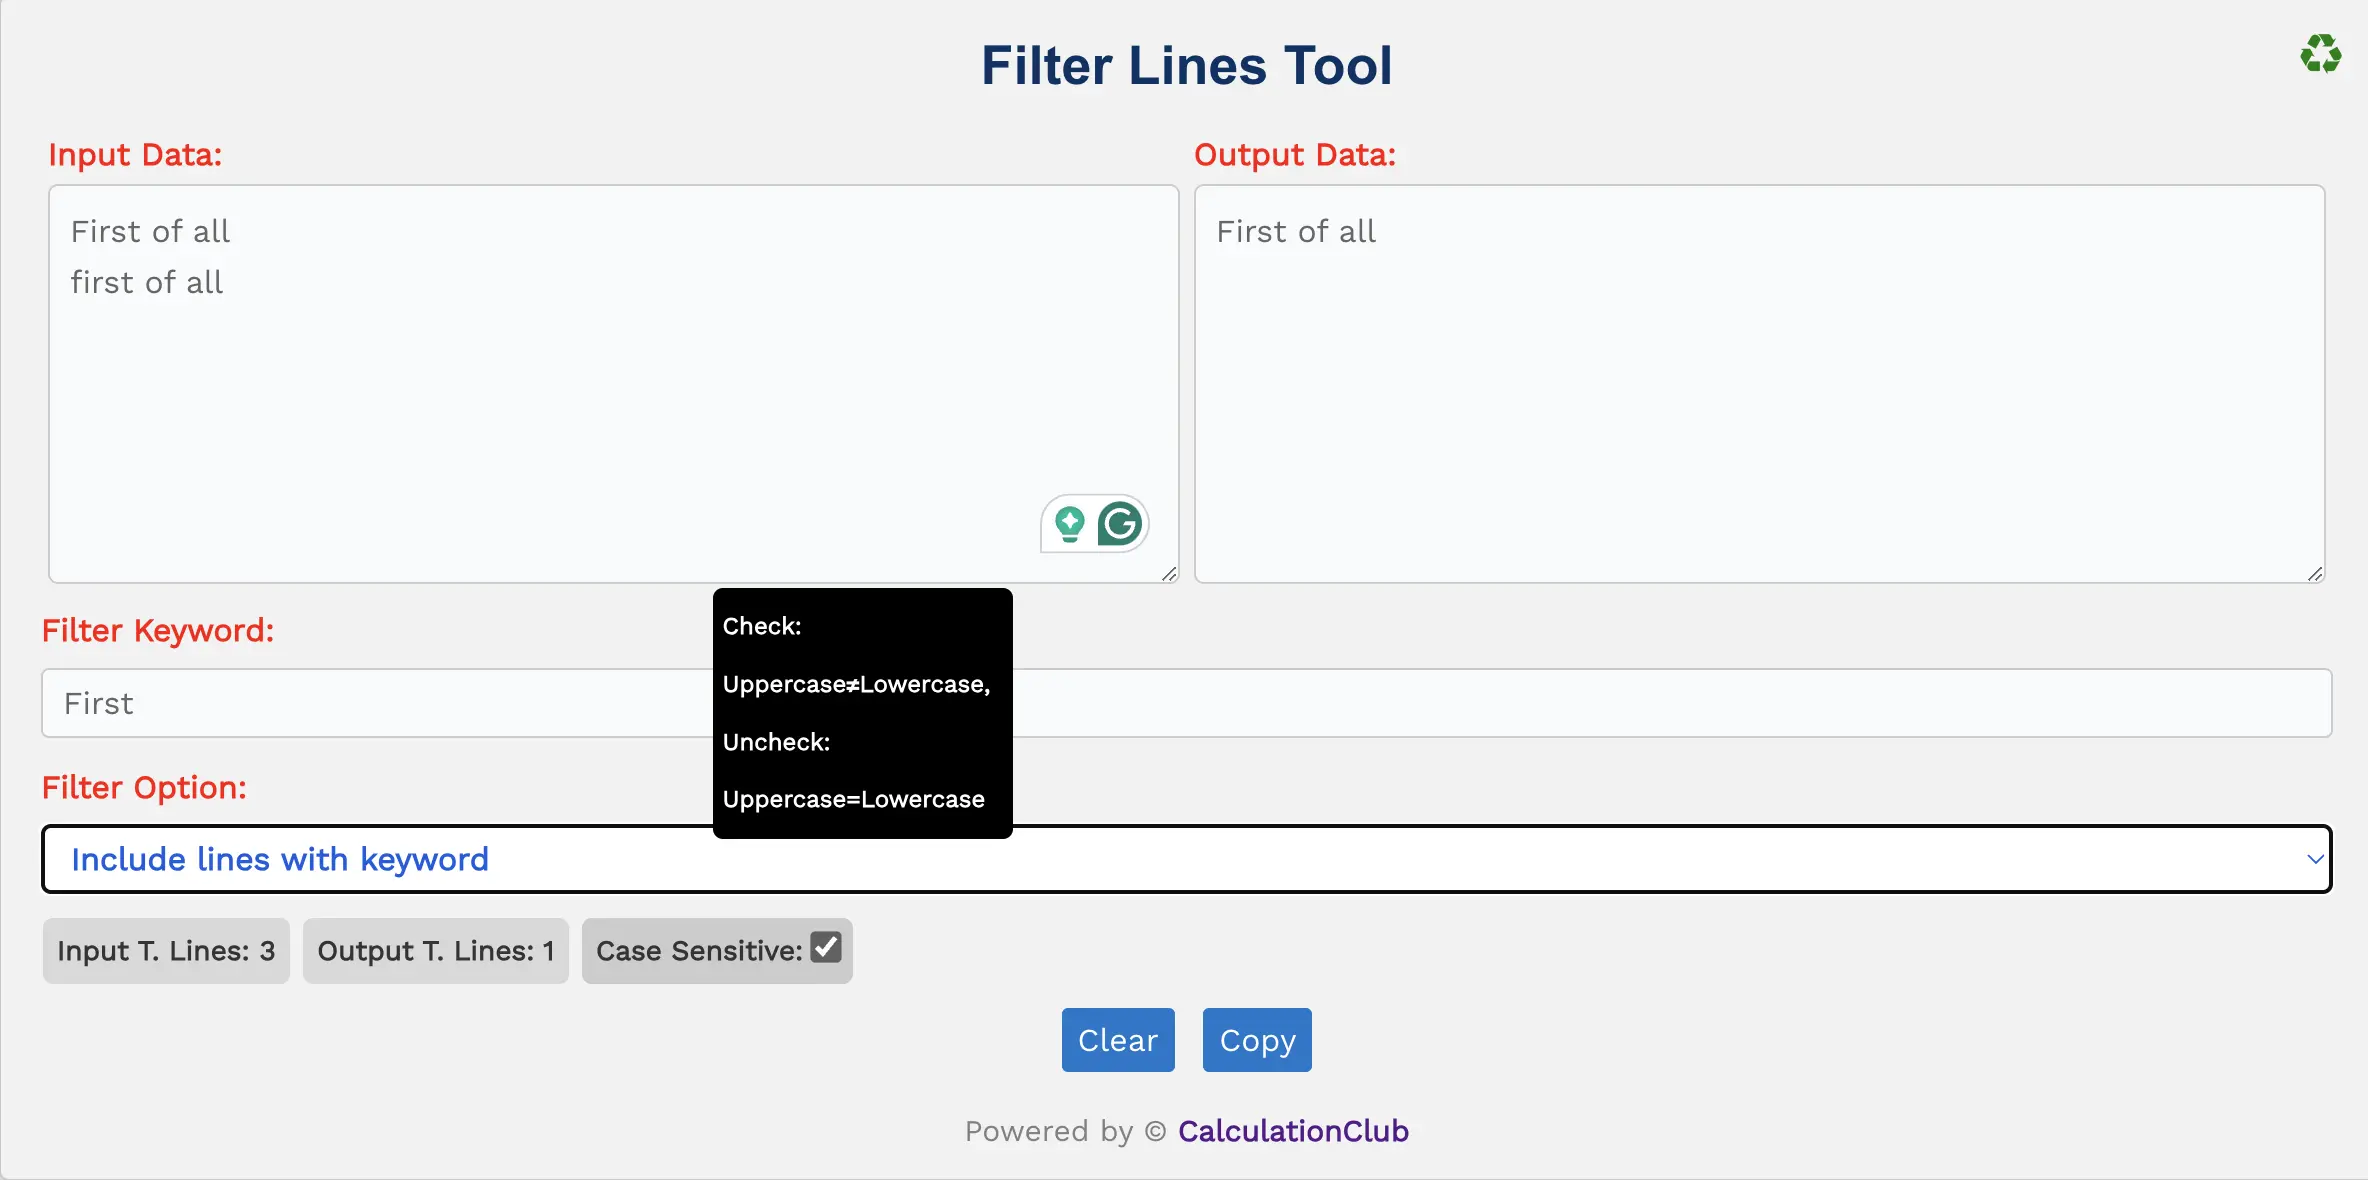 Filter Lines Tool